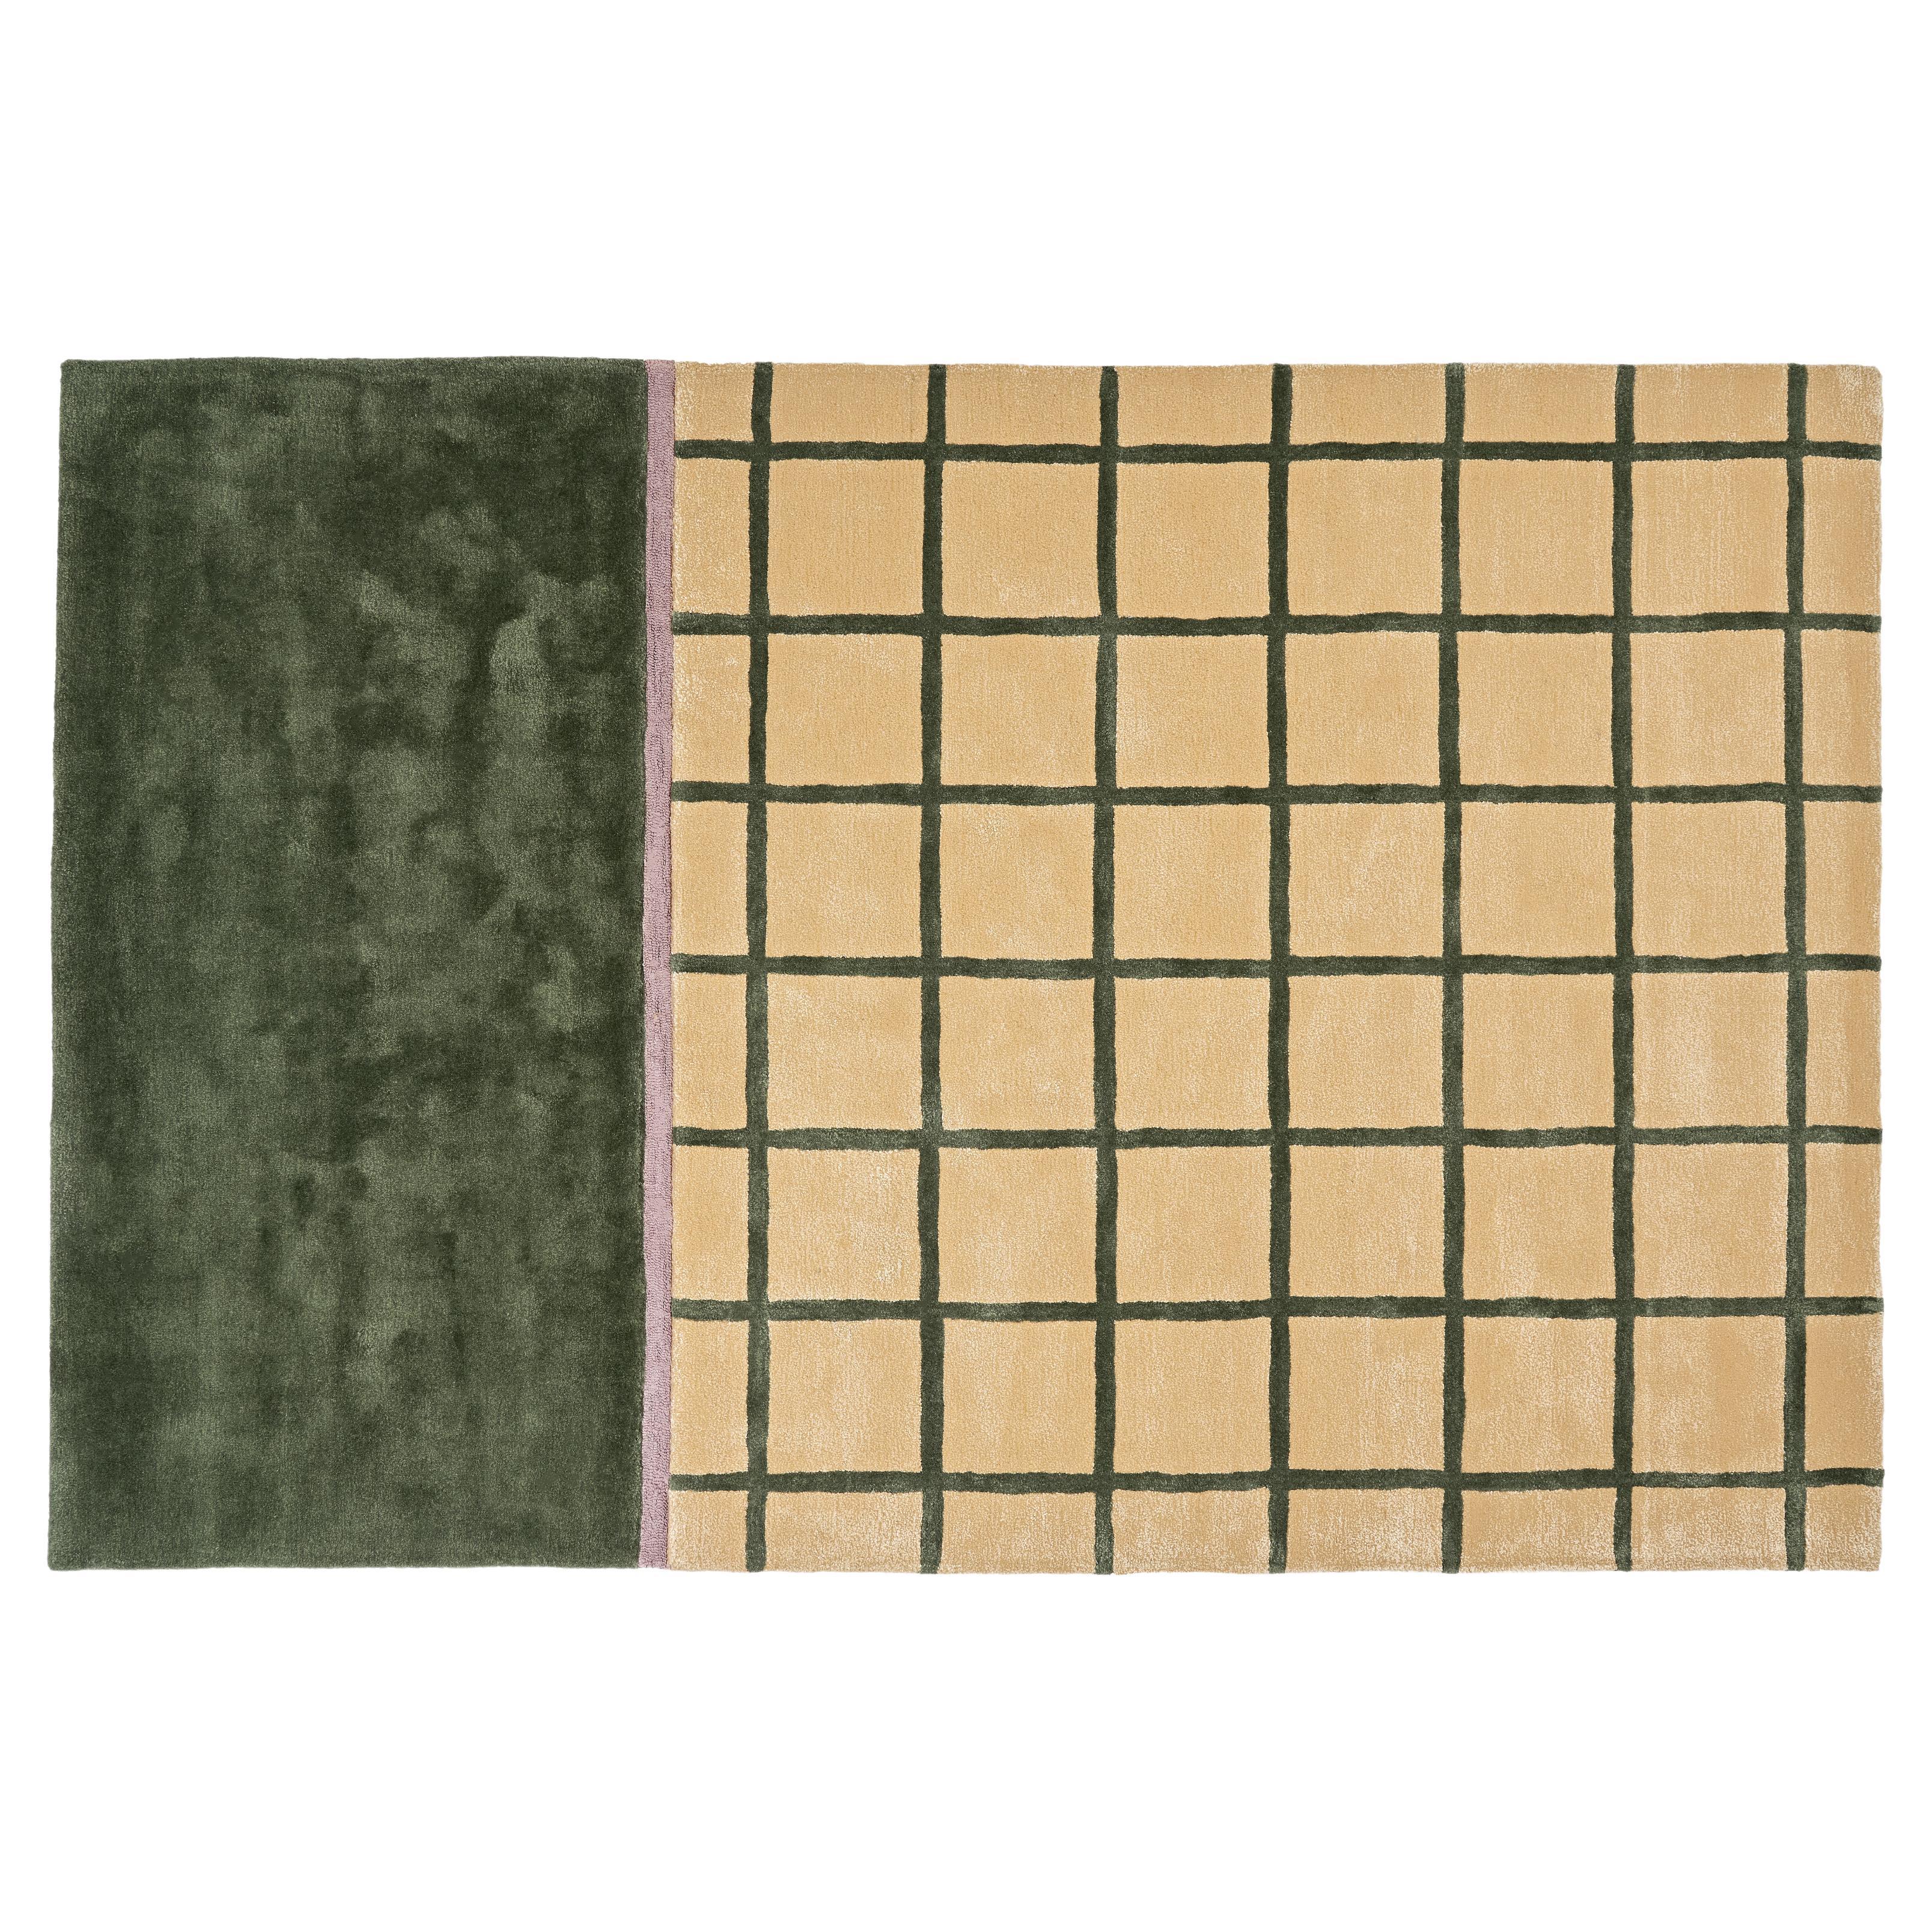  Kenny Grid Pattern Rug by Pieces, Modern Hand tufted Rug Carpet 